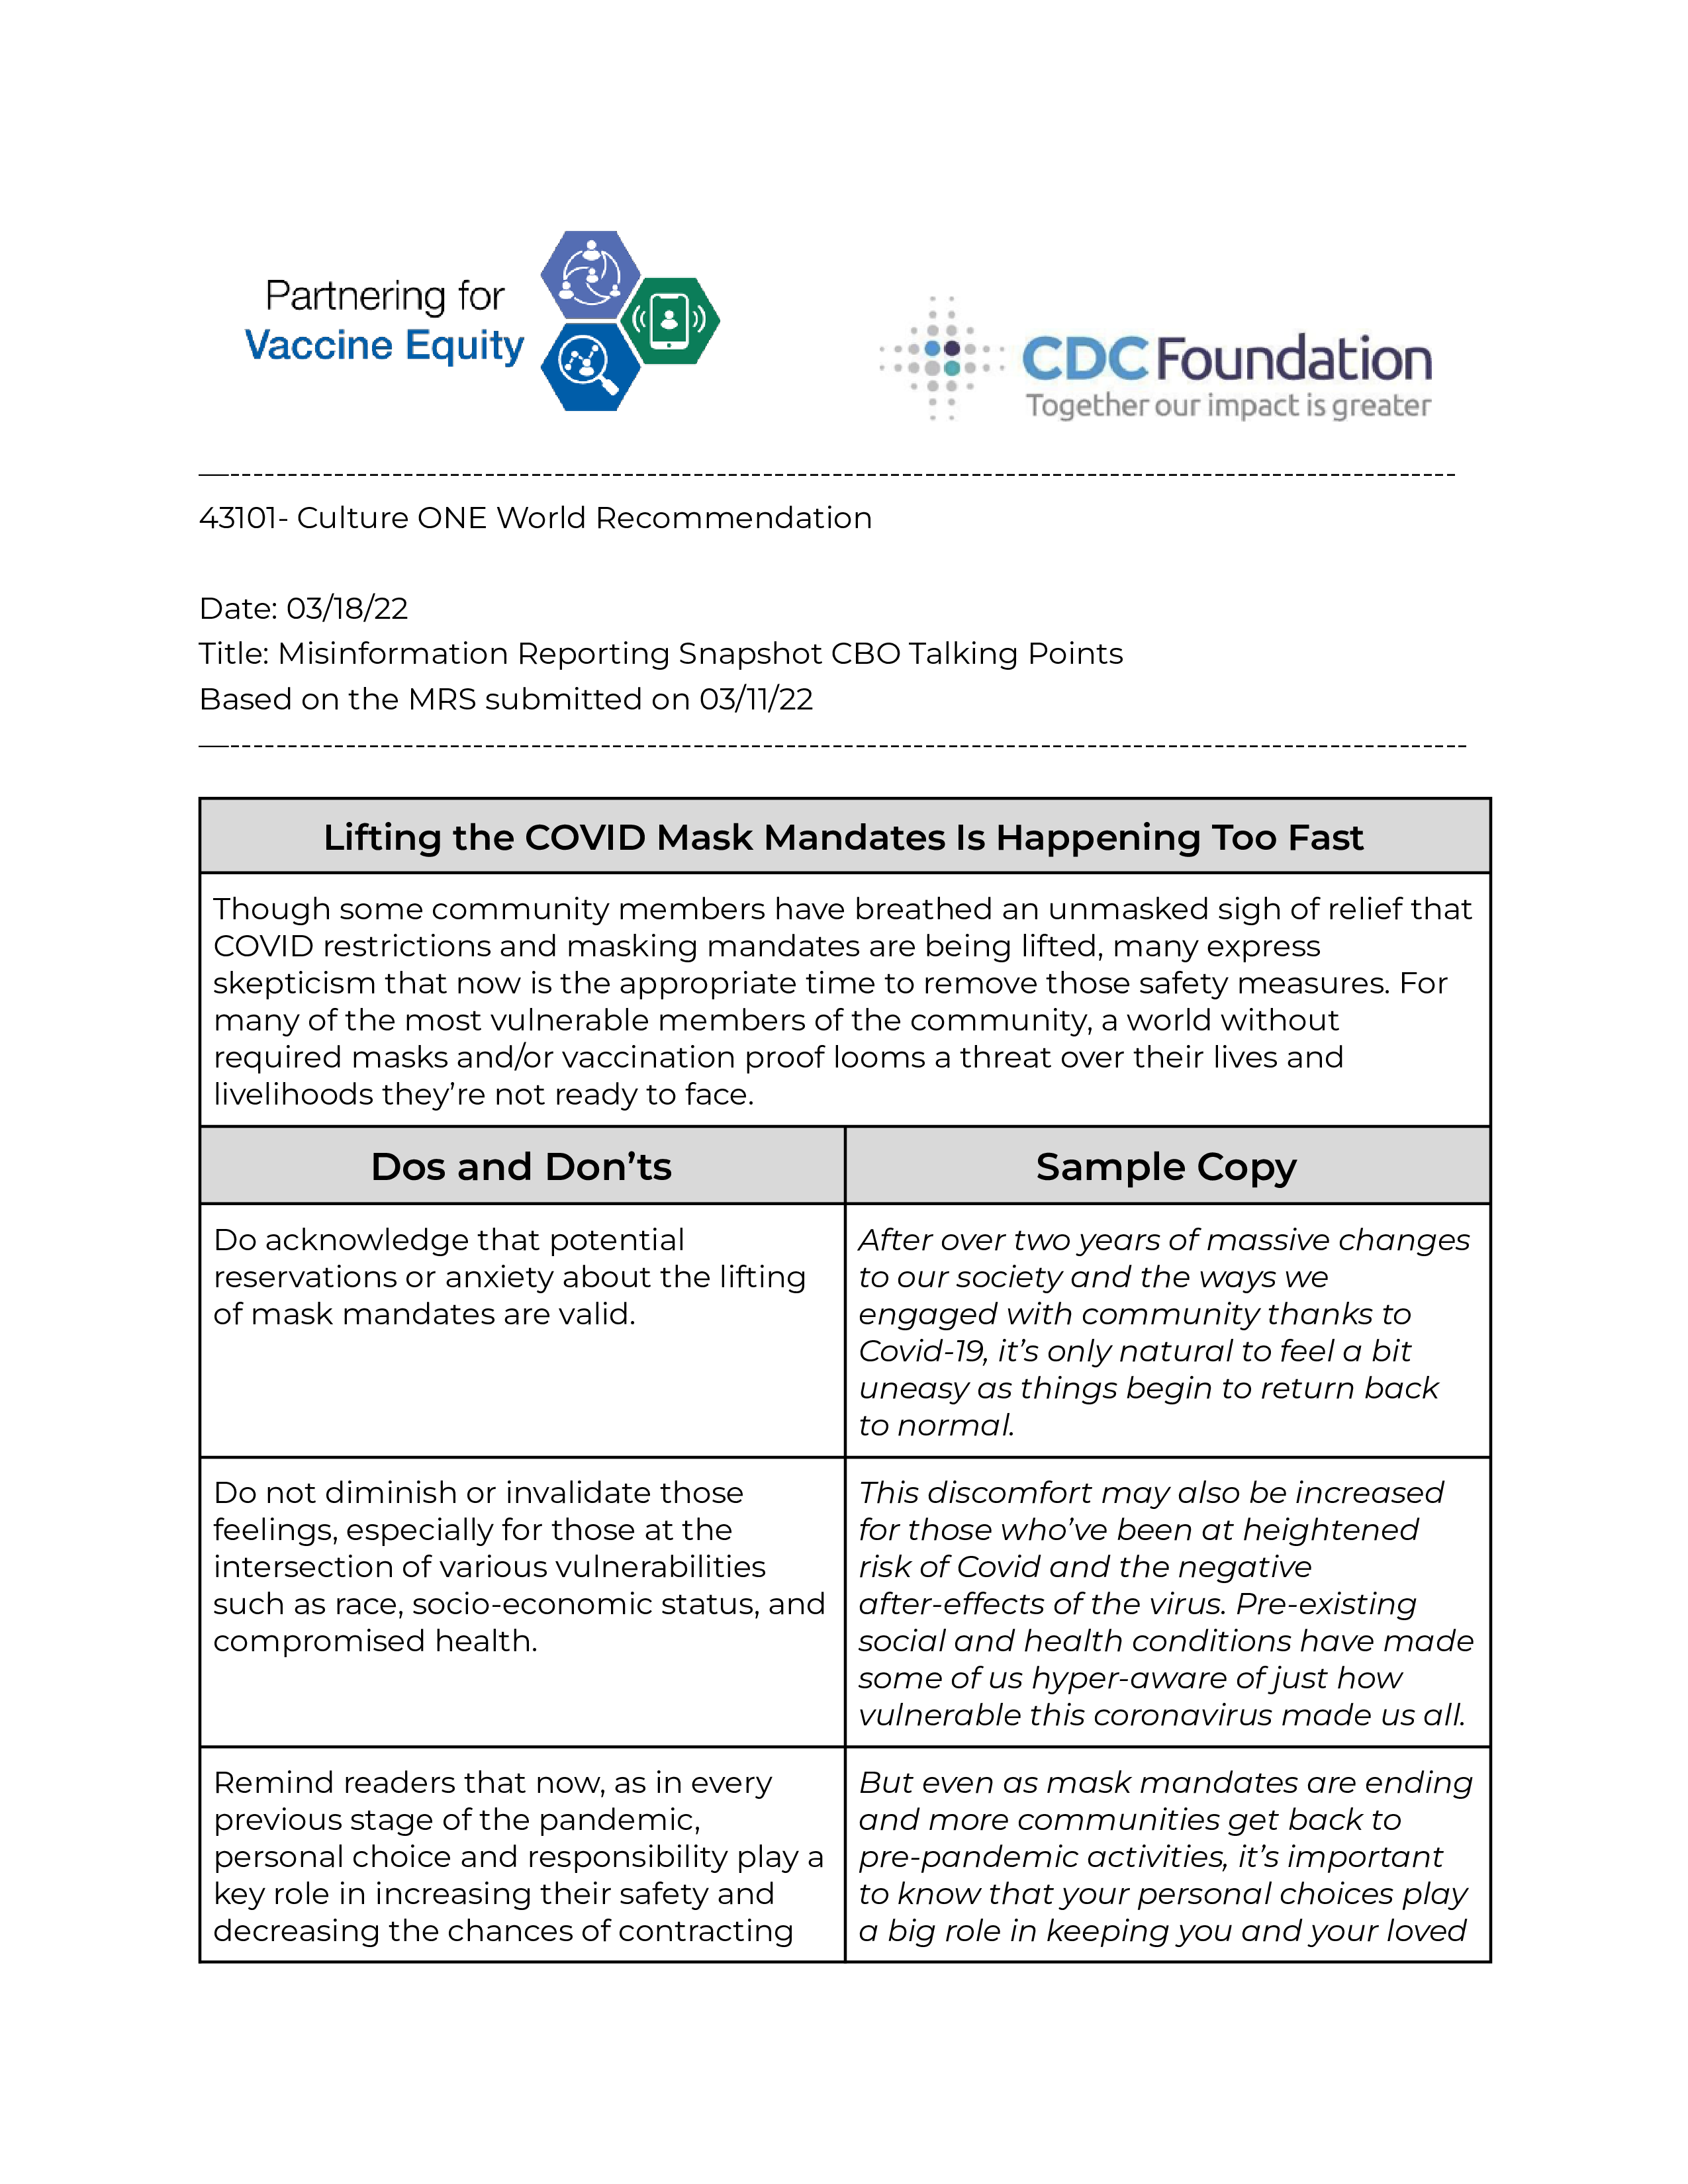 Screenshot of misinformation reporting snapshot. Partnering For Vaccine Equity (P4VE) and CDC Foundation logos are on the top. 